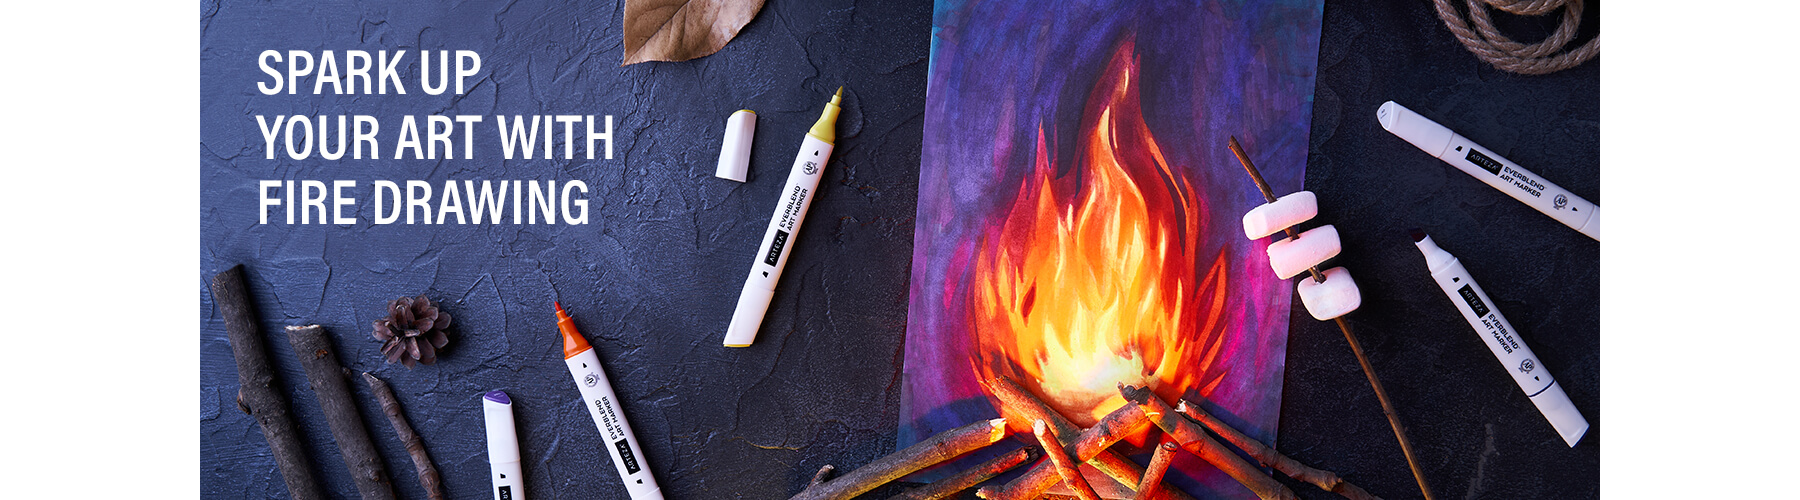 How To Draw A Realistic Flame With Derwent Lightfast Coloured Pencil |  Artist Tutorial - YouTube